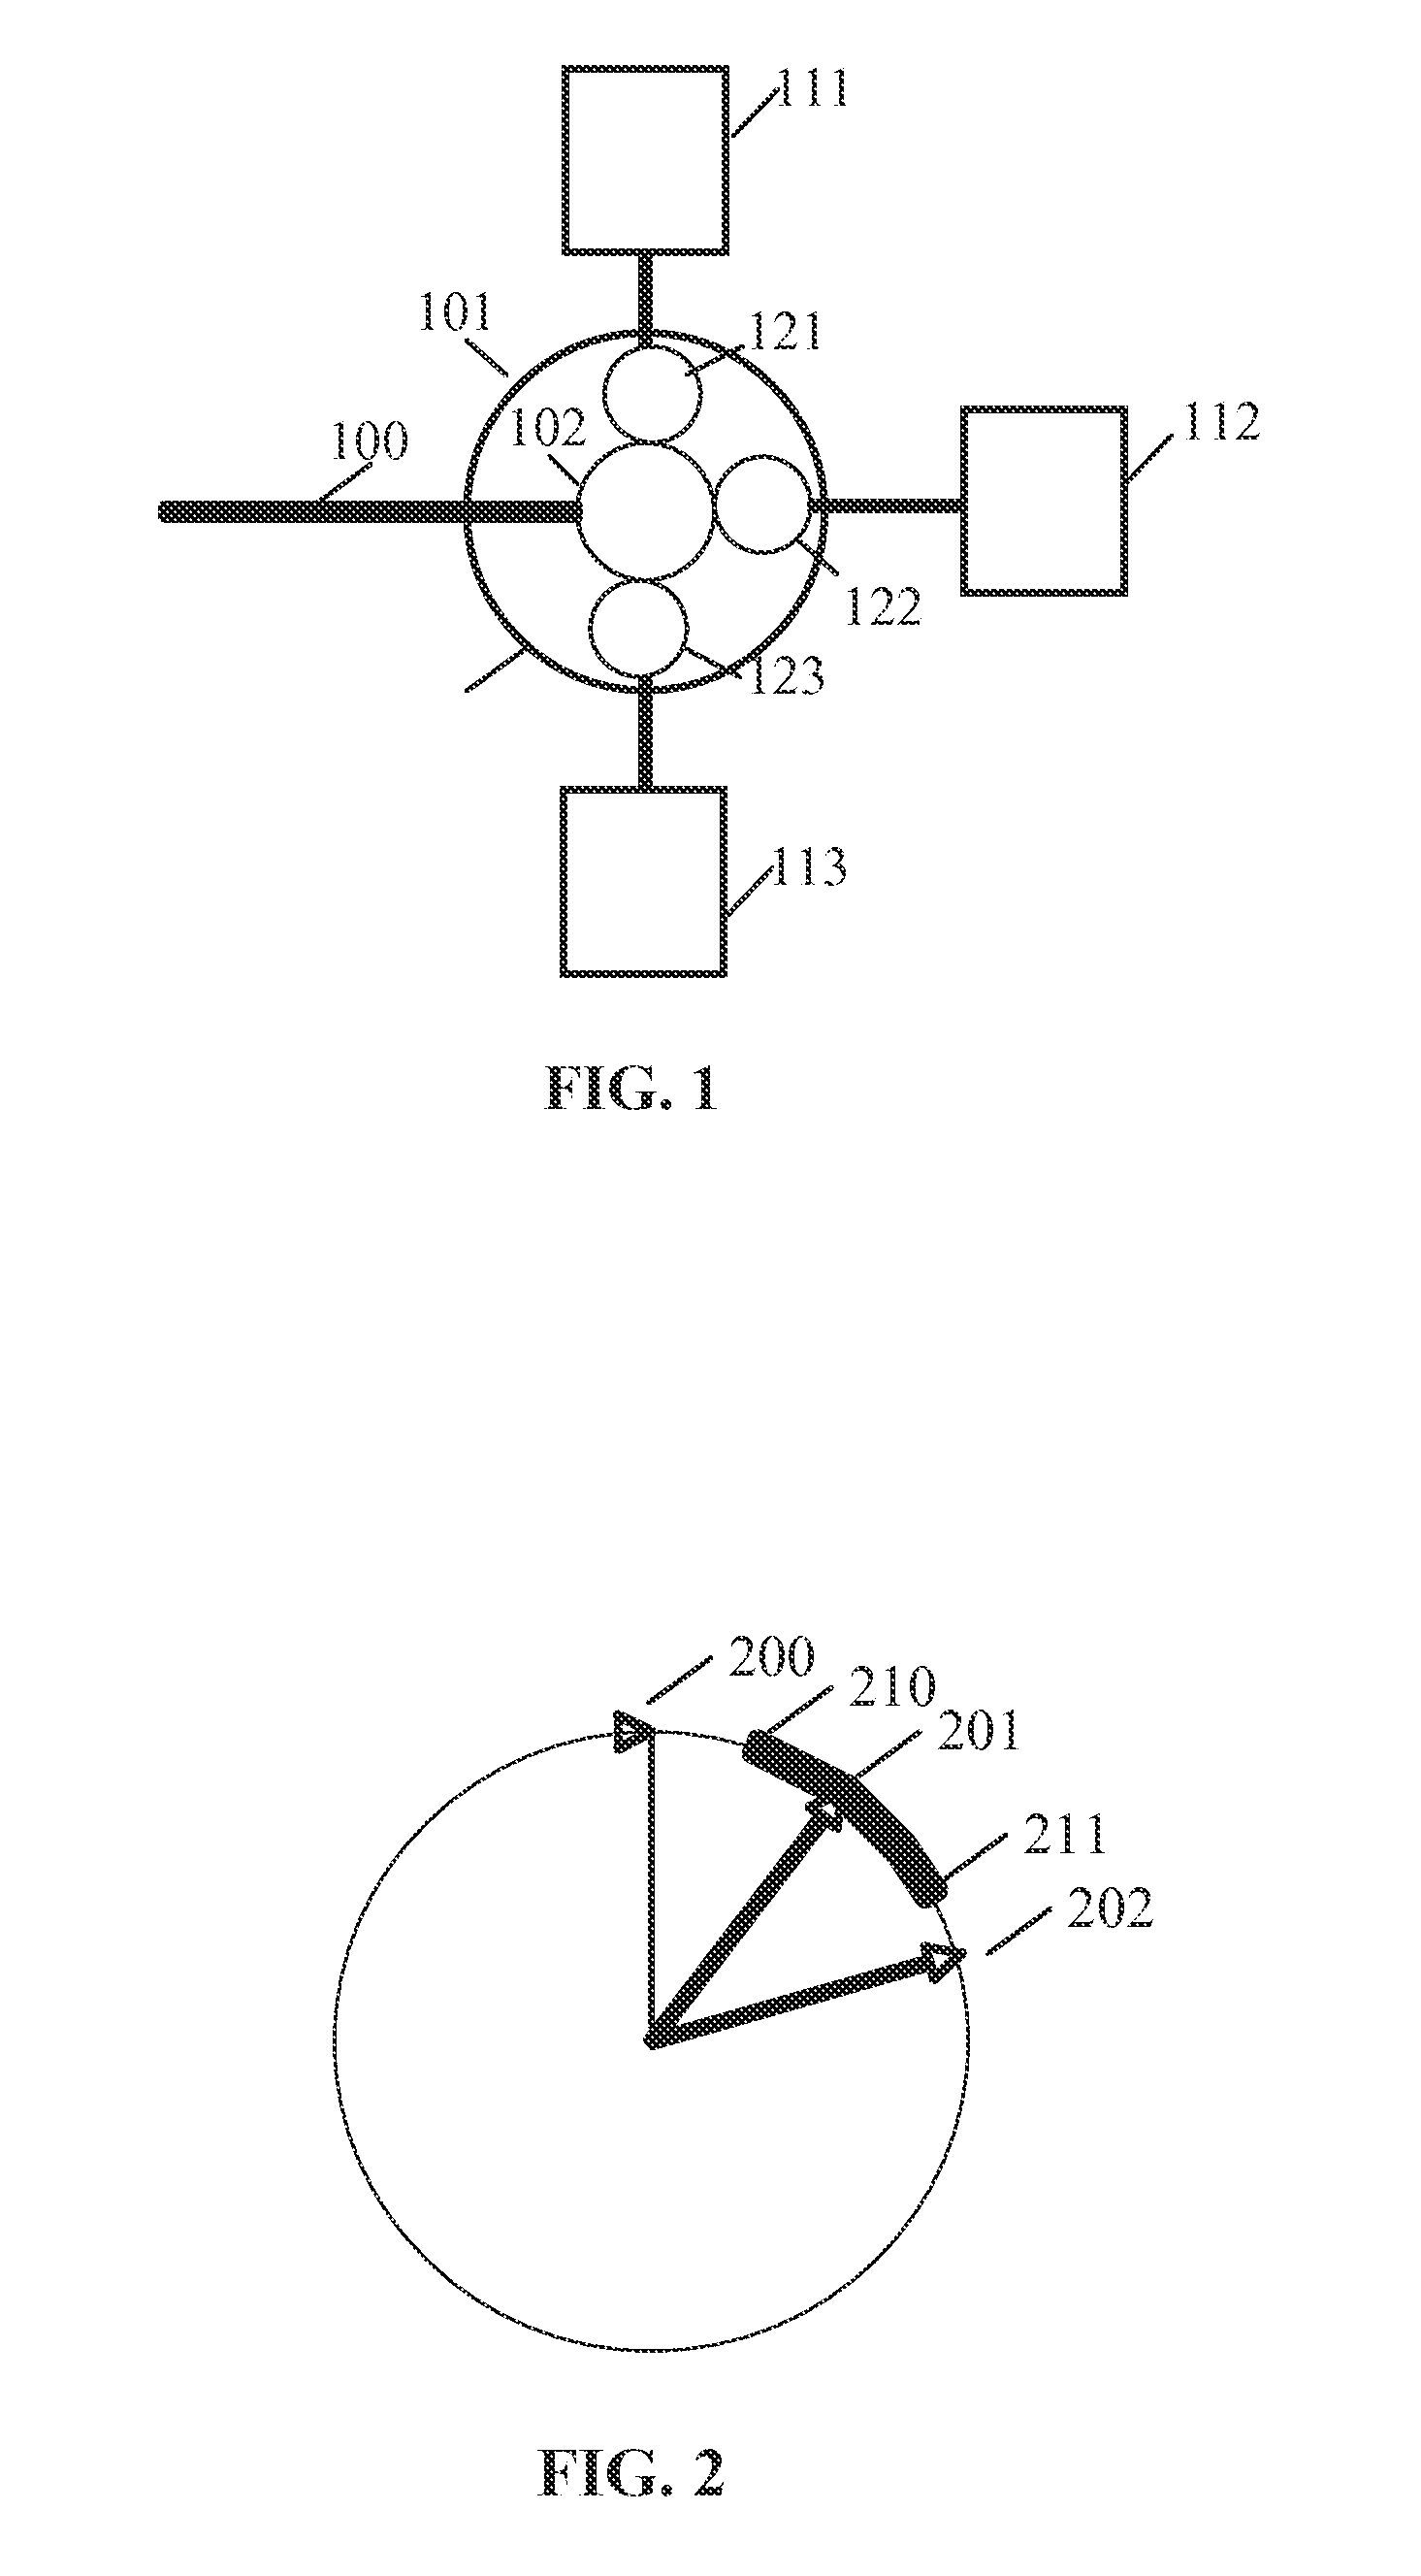 Communication method and apparatus for the efficient and reliable transmission of tt ethernet messages